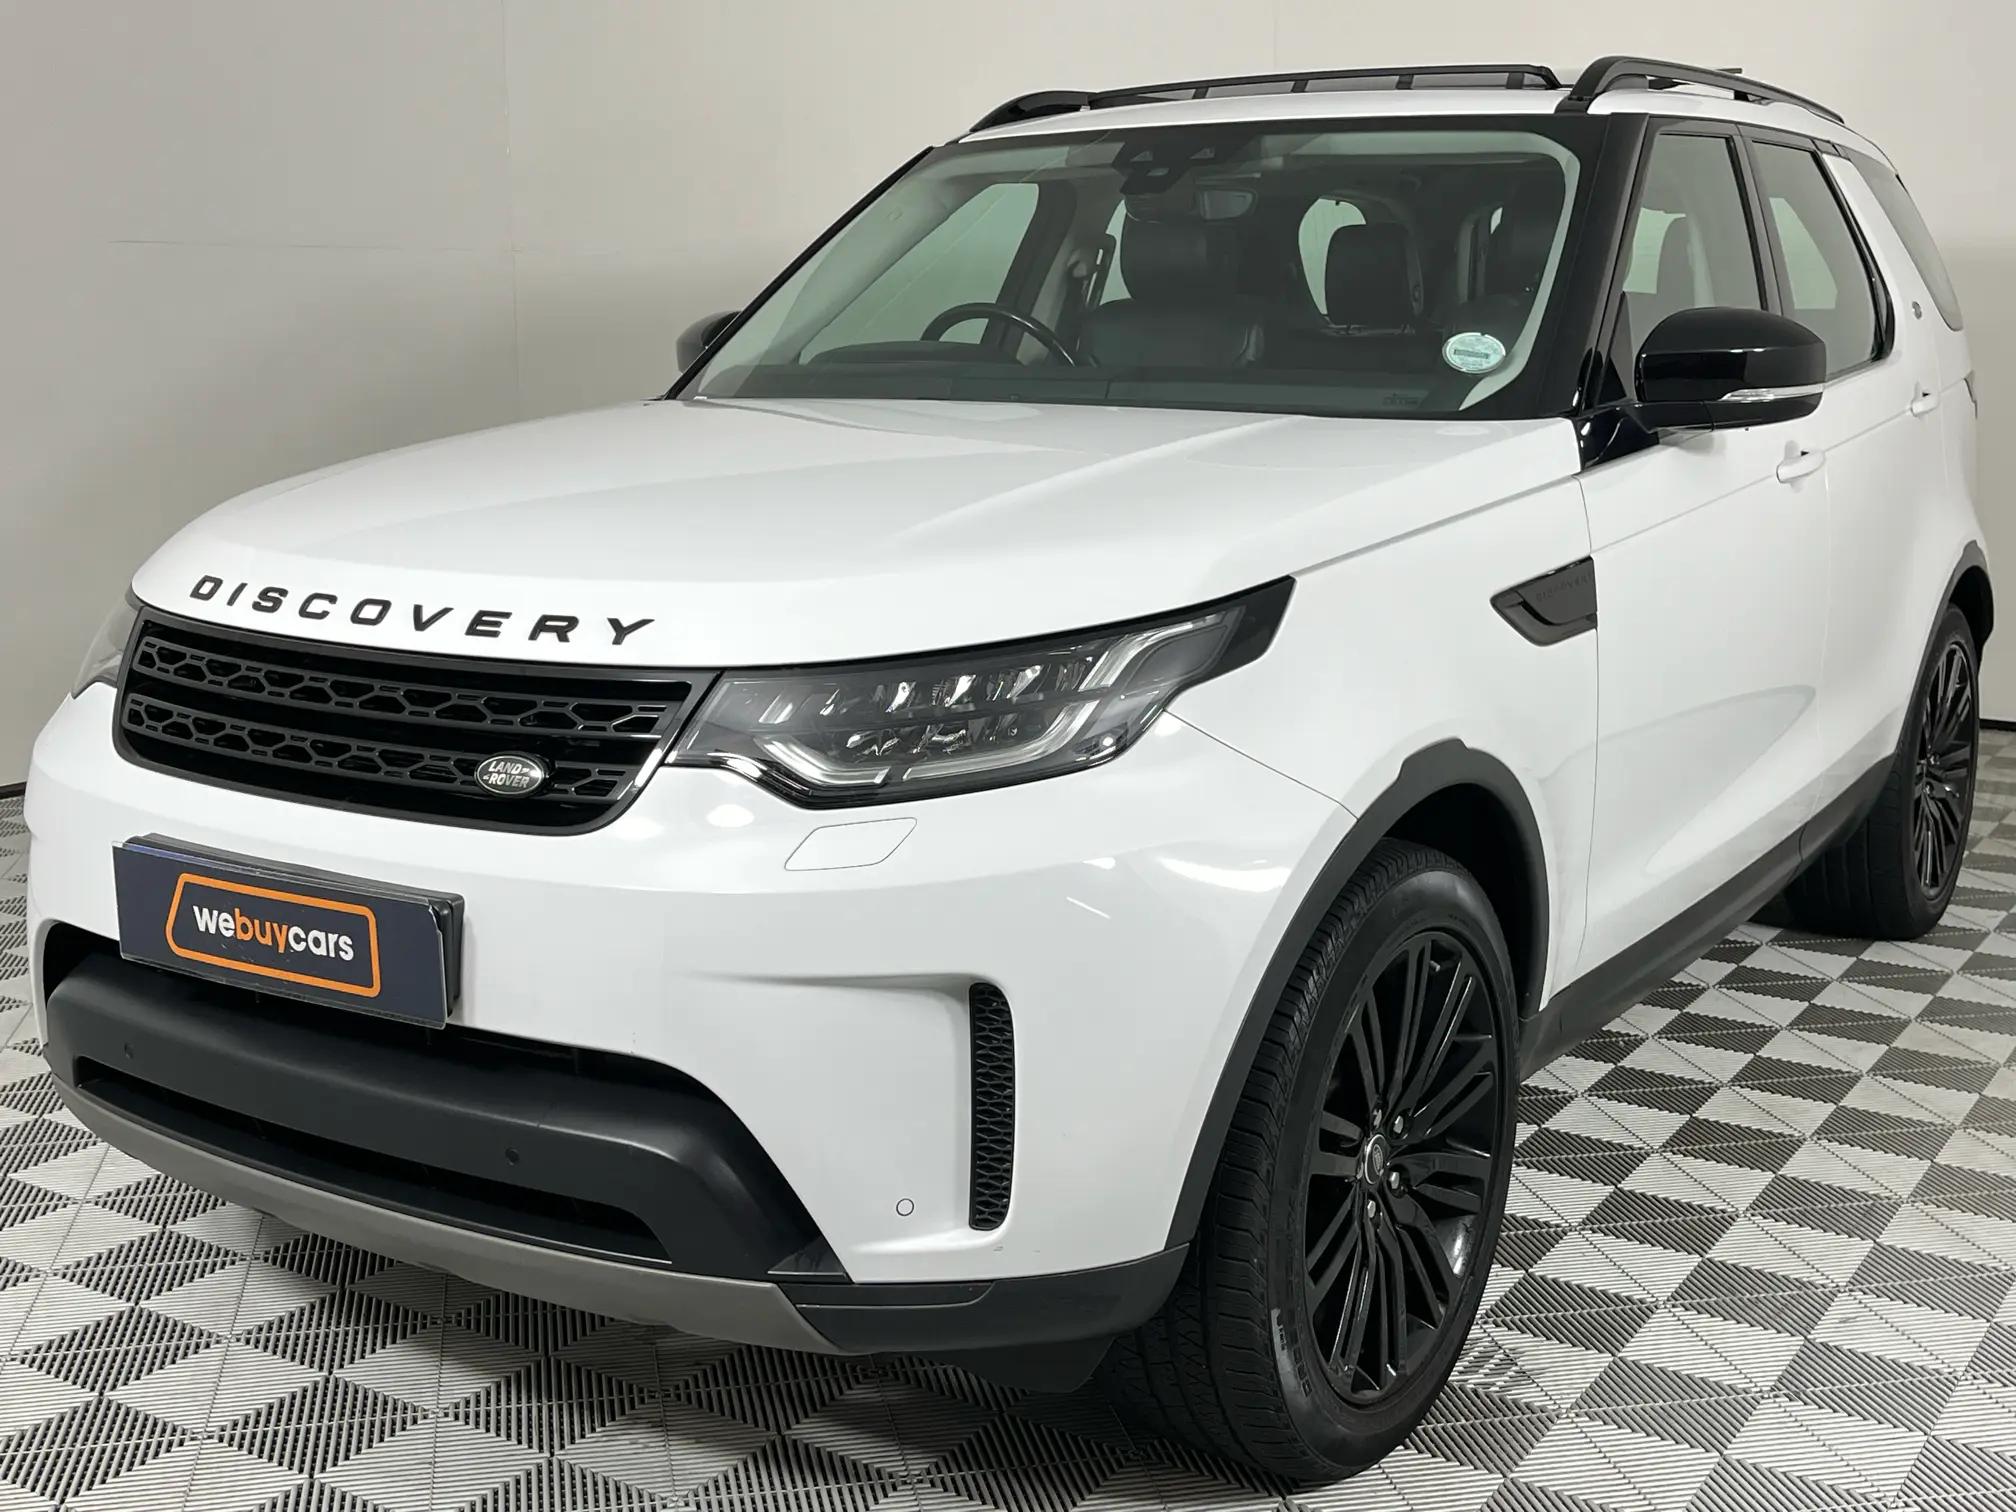 Land Rover Discovery 5 3.0 TD6 HSE Luxury